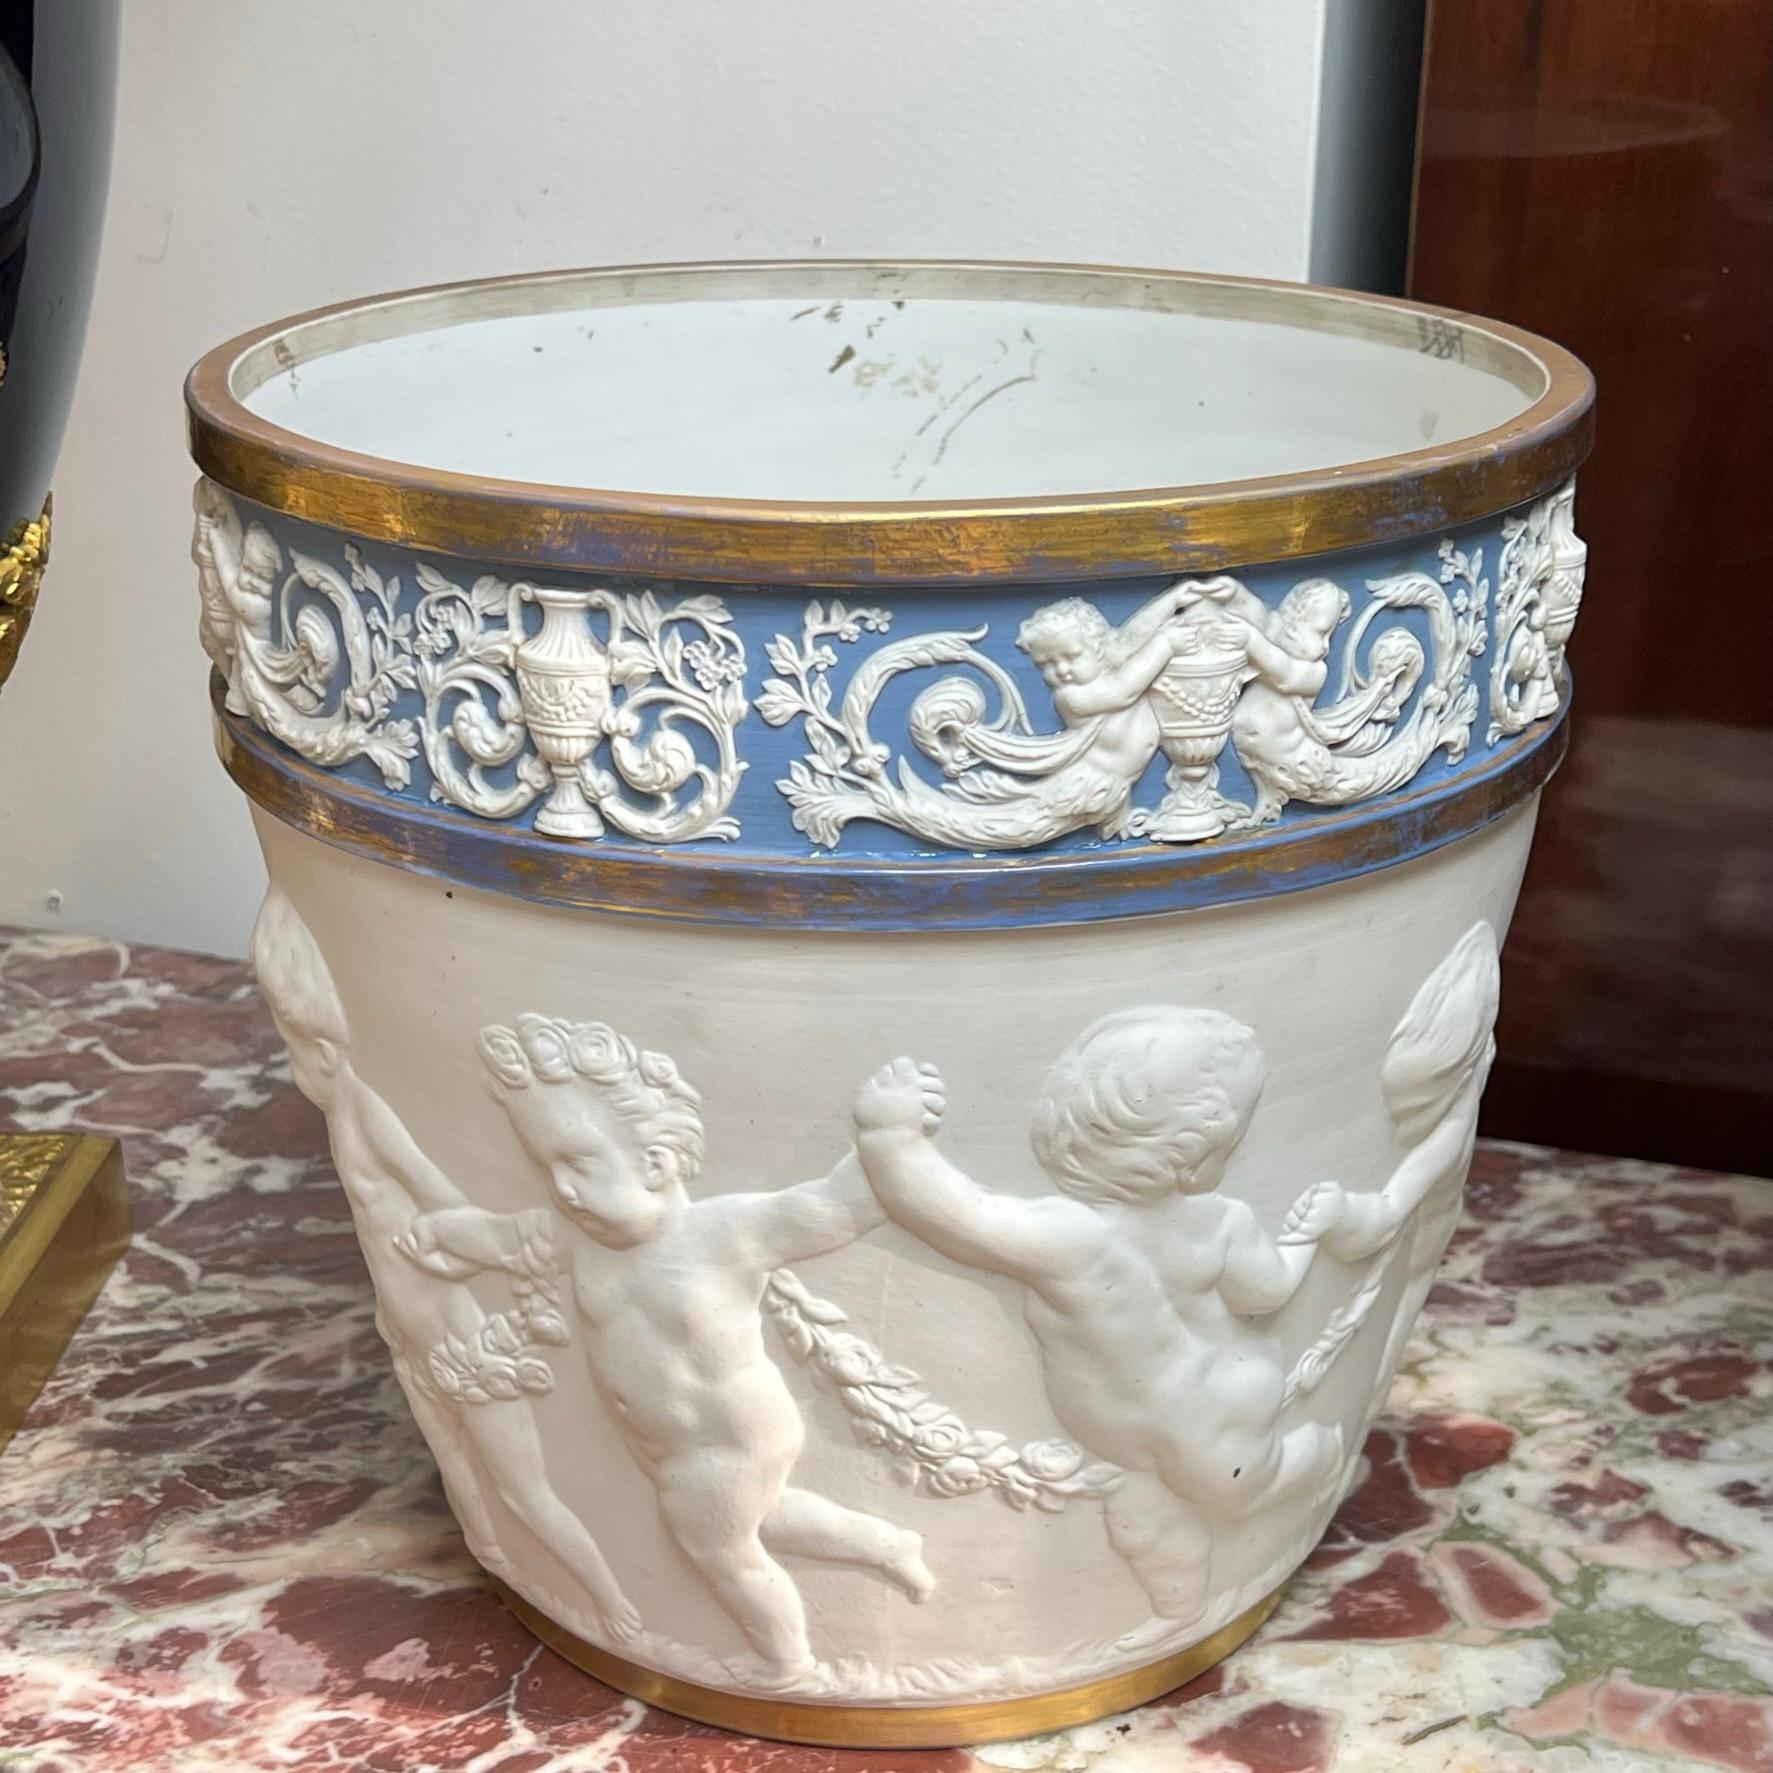 Our French jardiniere in the Louis XVI style dates from the late nineteenth century and features the figures of frolicking putti in relief, and jasperware band depicting neoclassical motifs in bisque on blue ground. A fine and large example of a